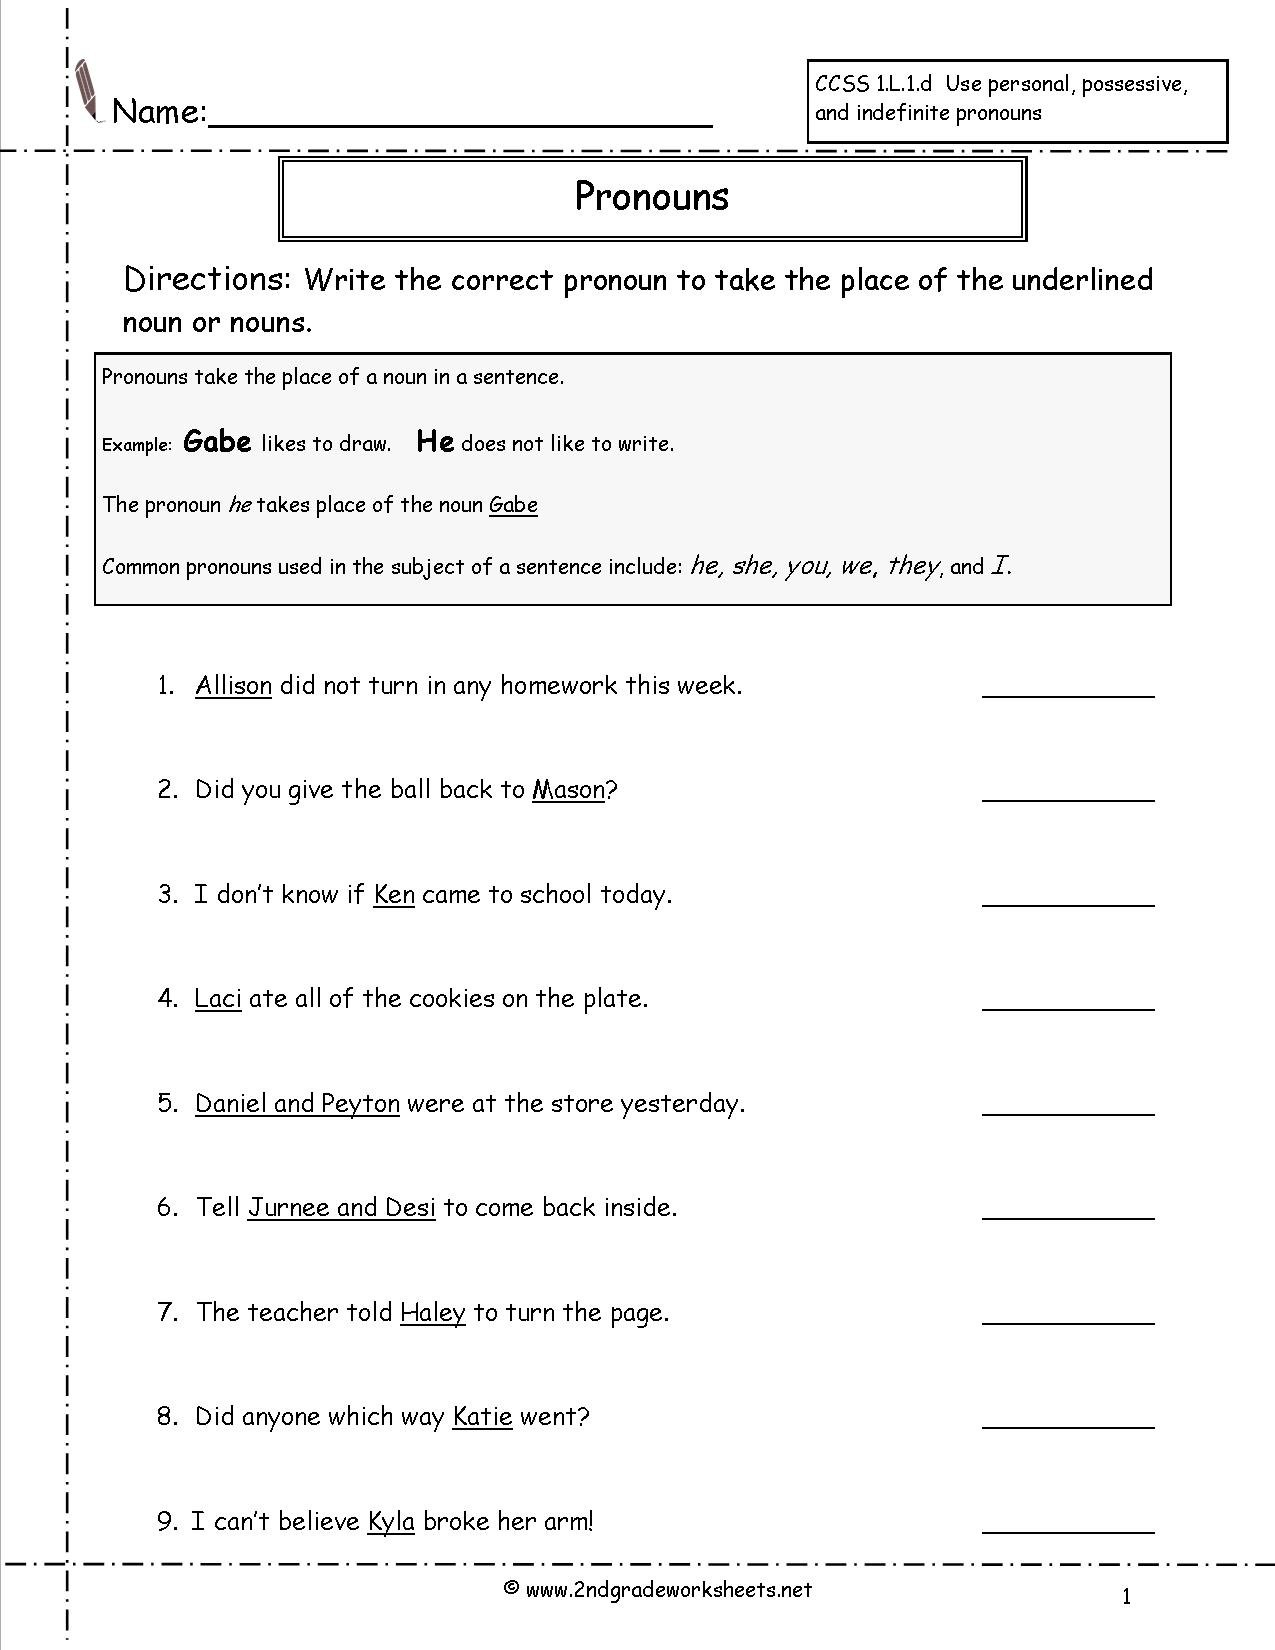 Nouns Worksheets And Printouts For Nouns And Pronouns Worksheets